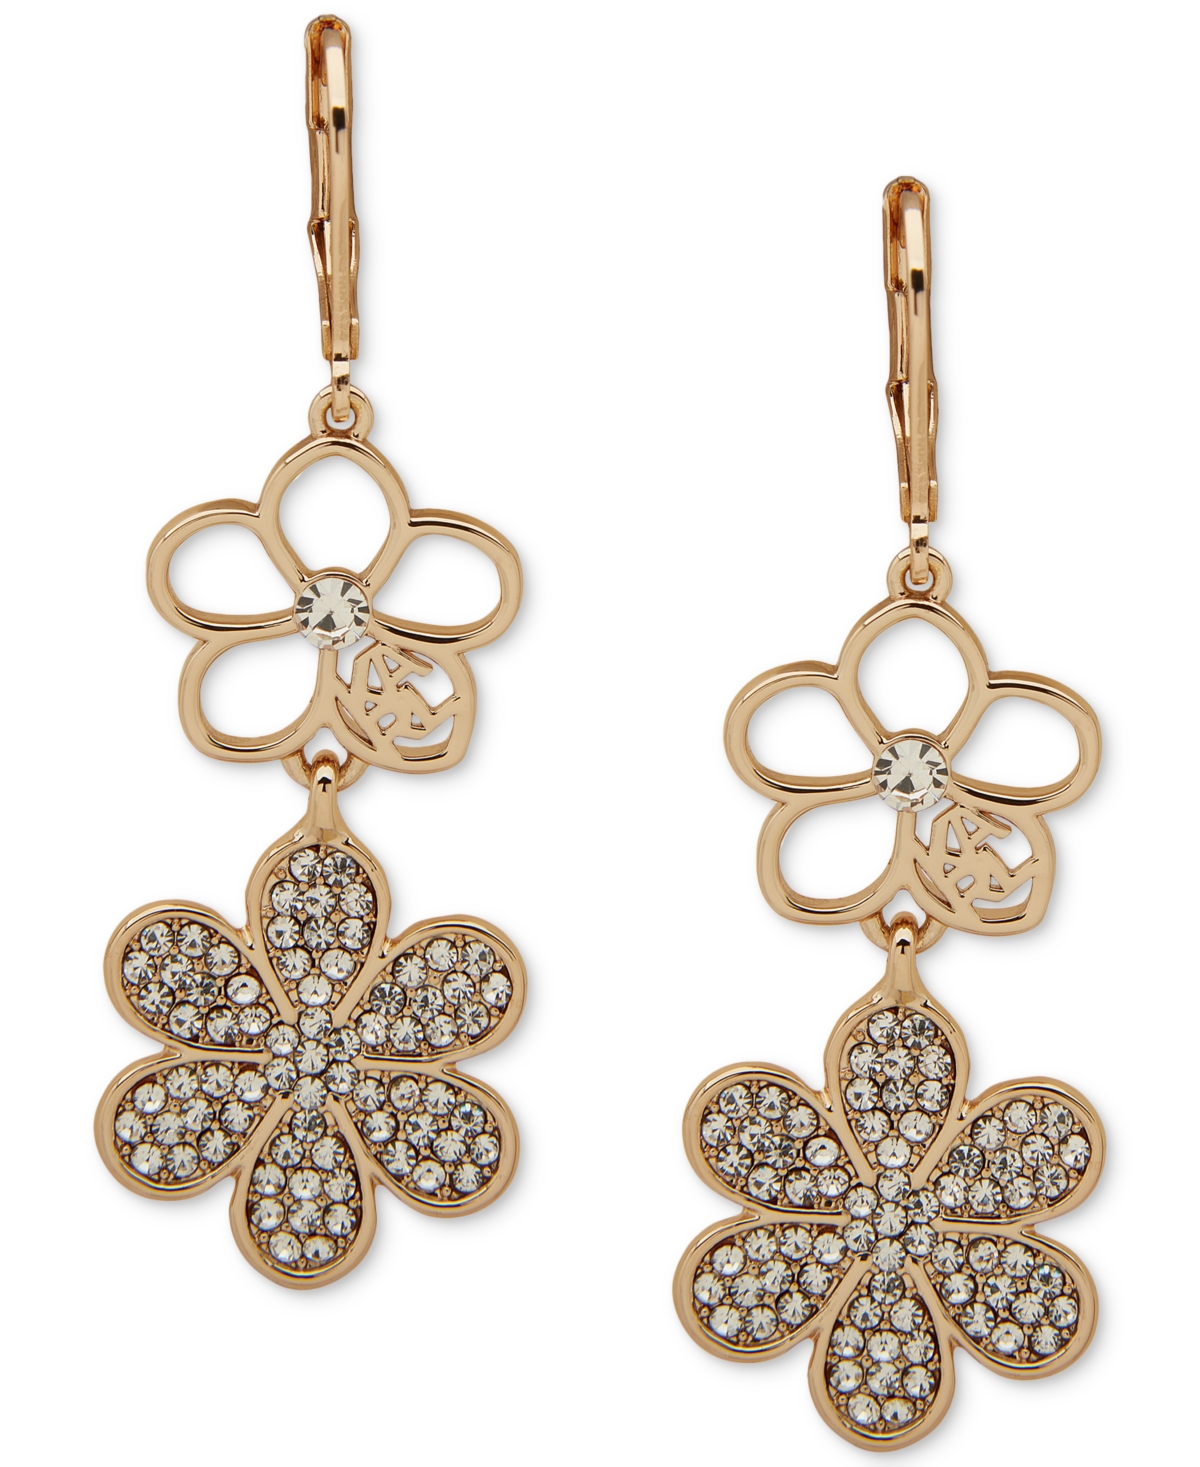 Gold-Tone Crystal Pave Flower Double Drop Earrings - Crystal Wh